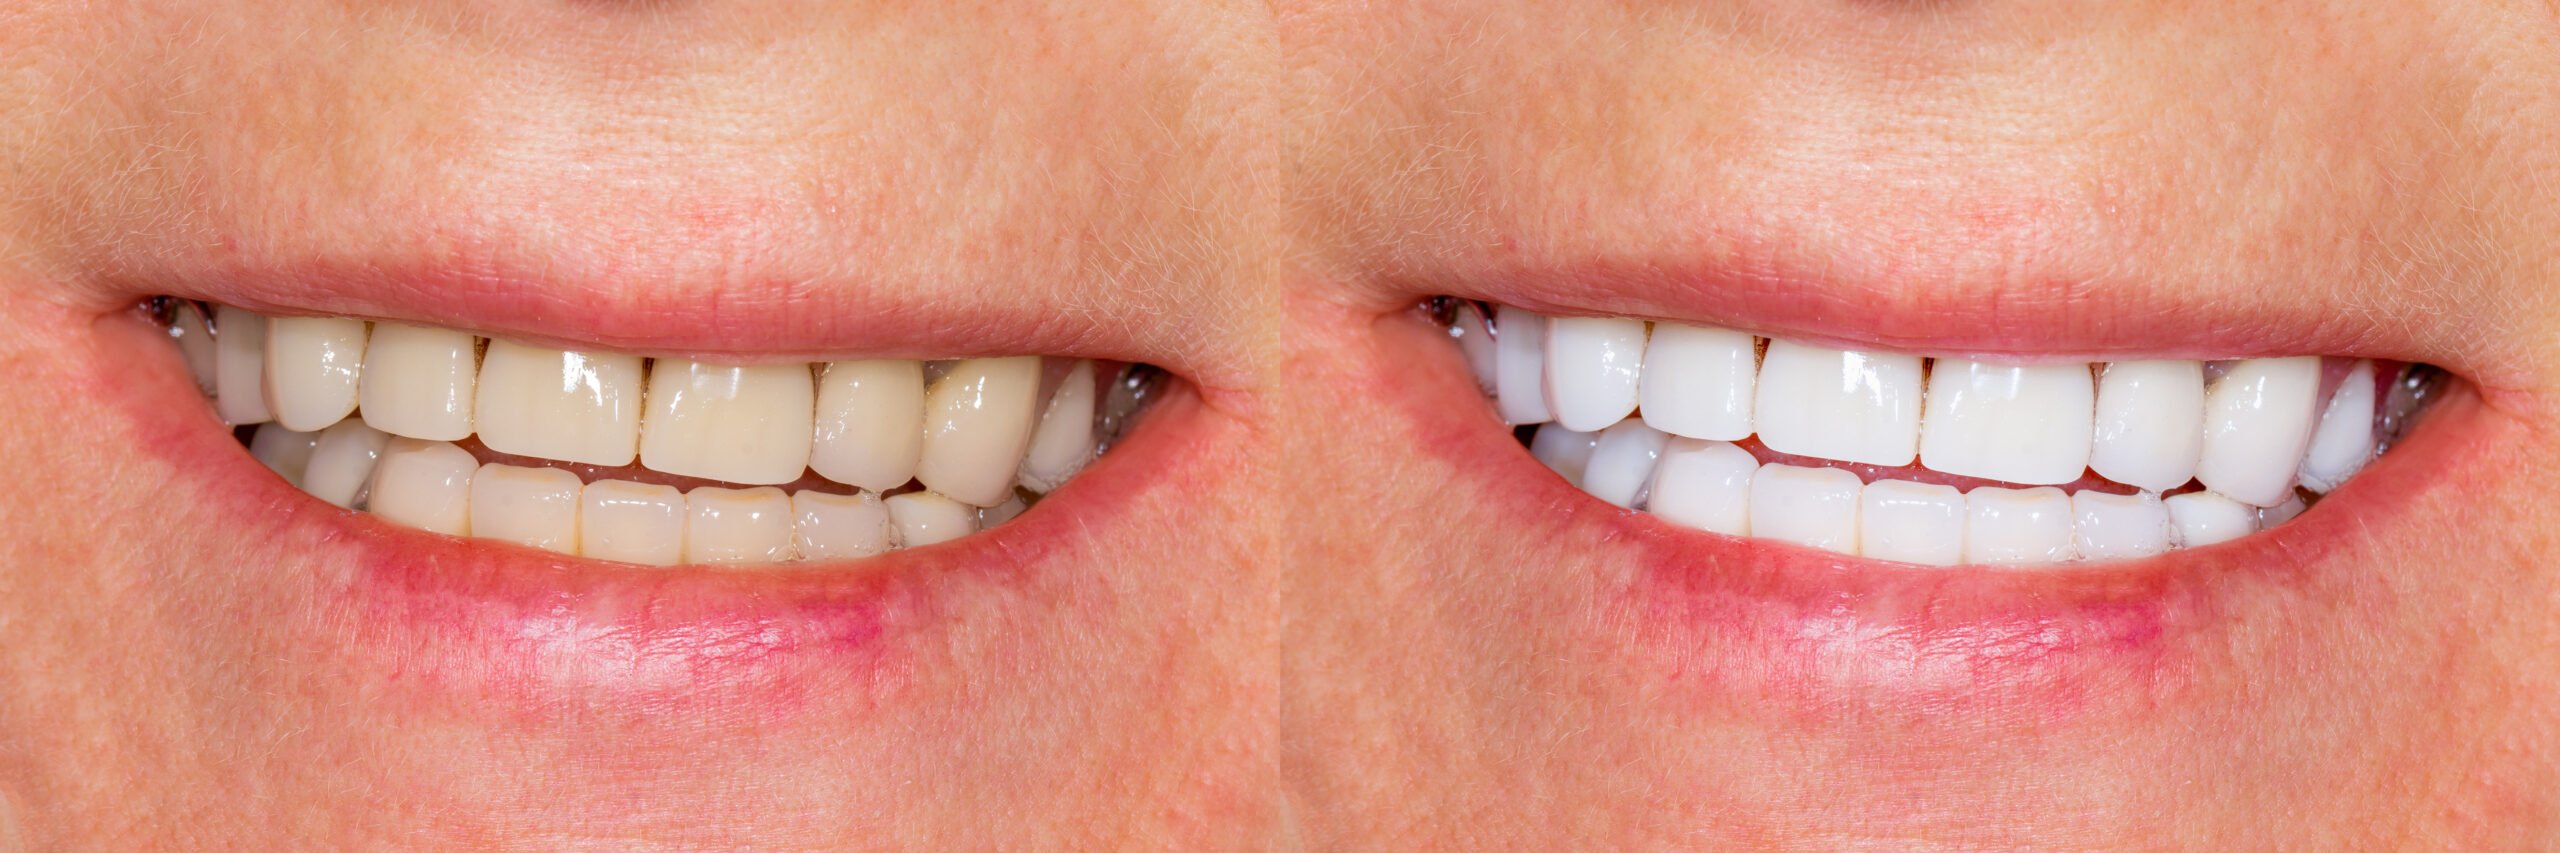 Dental veneers, ceramic crowns before and after treatment. Close-up of teeth and smile of person.